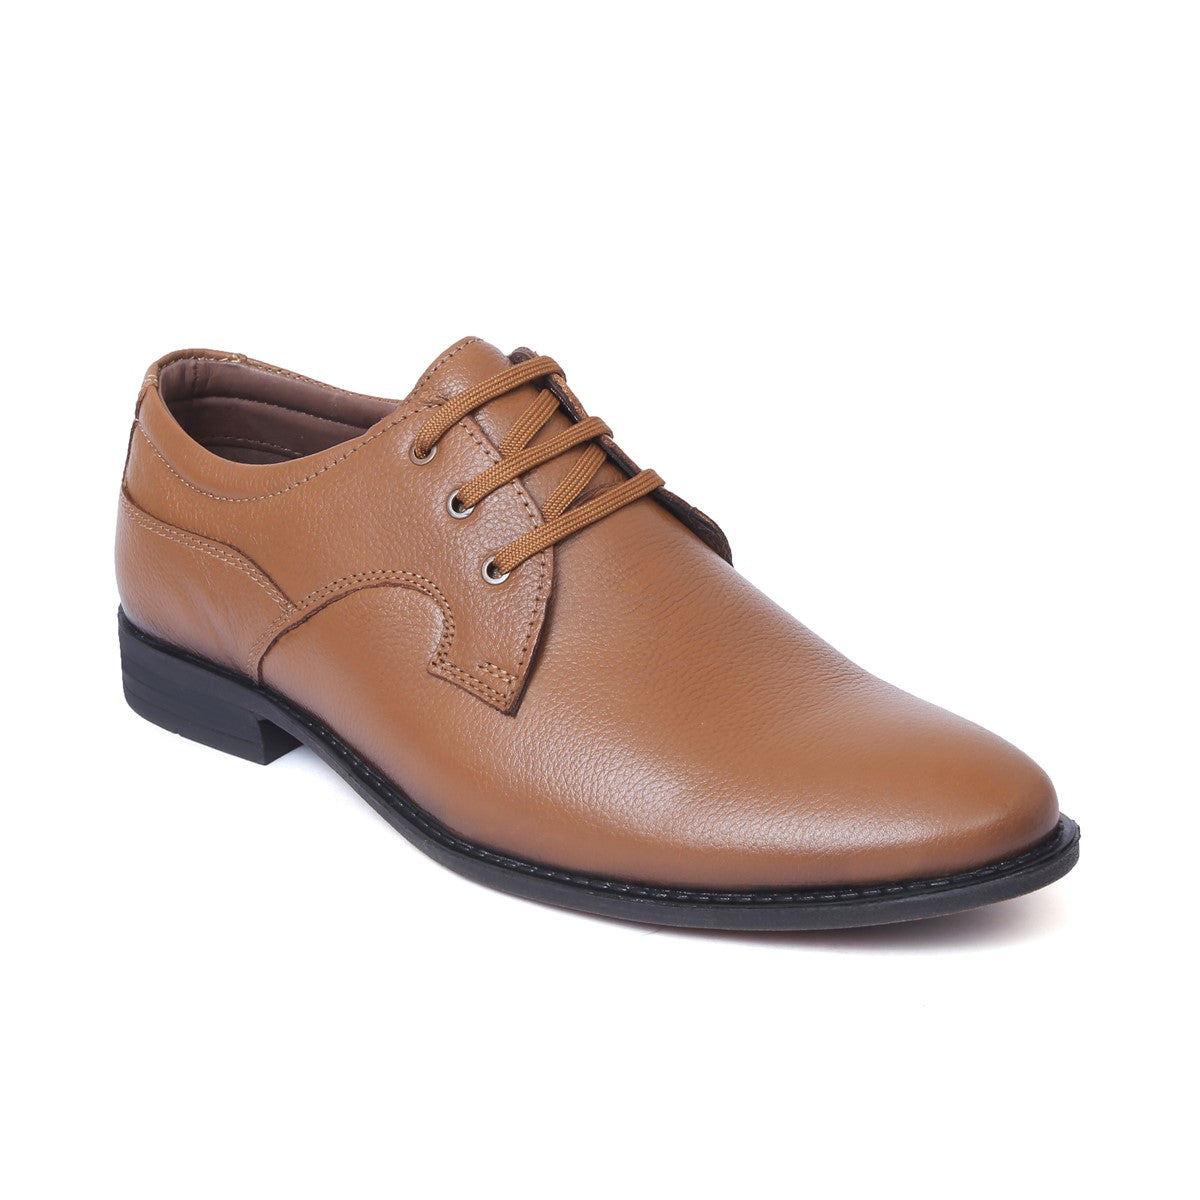 Formal Leather Shoes for Men B-51_Tan